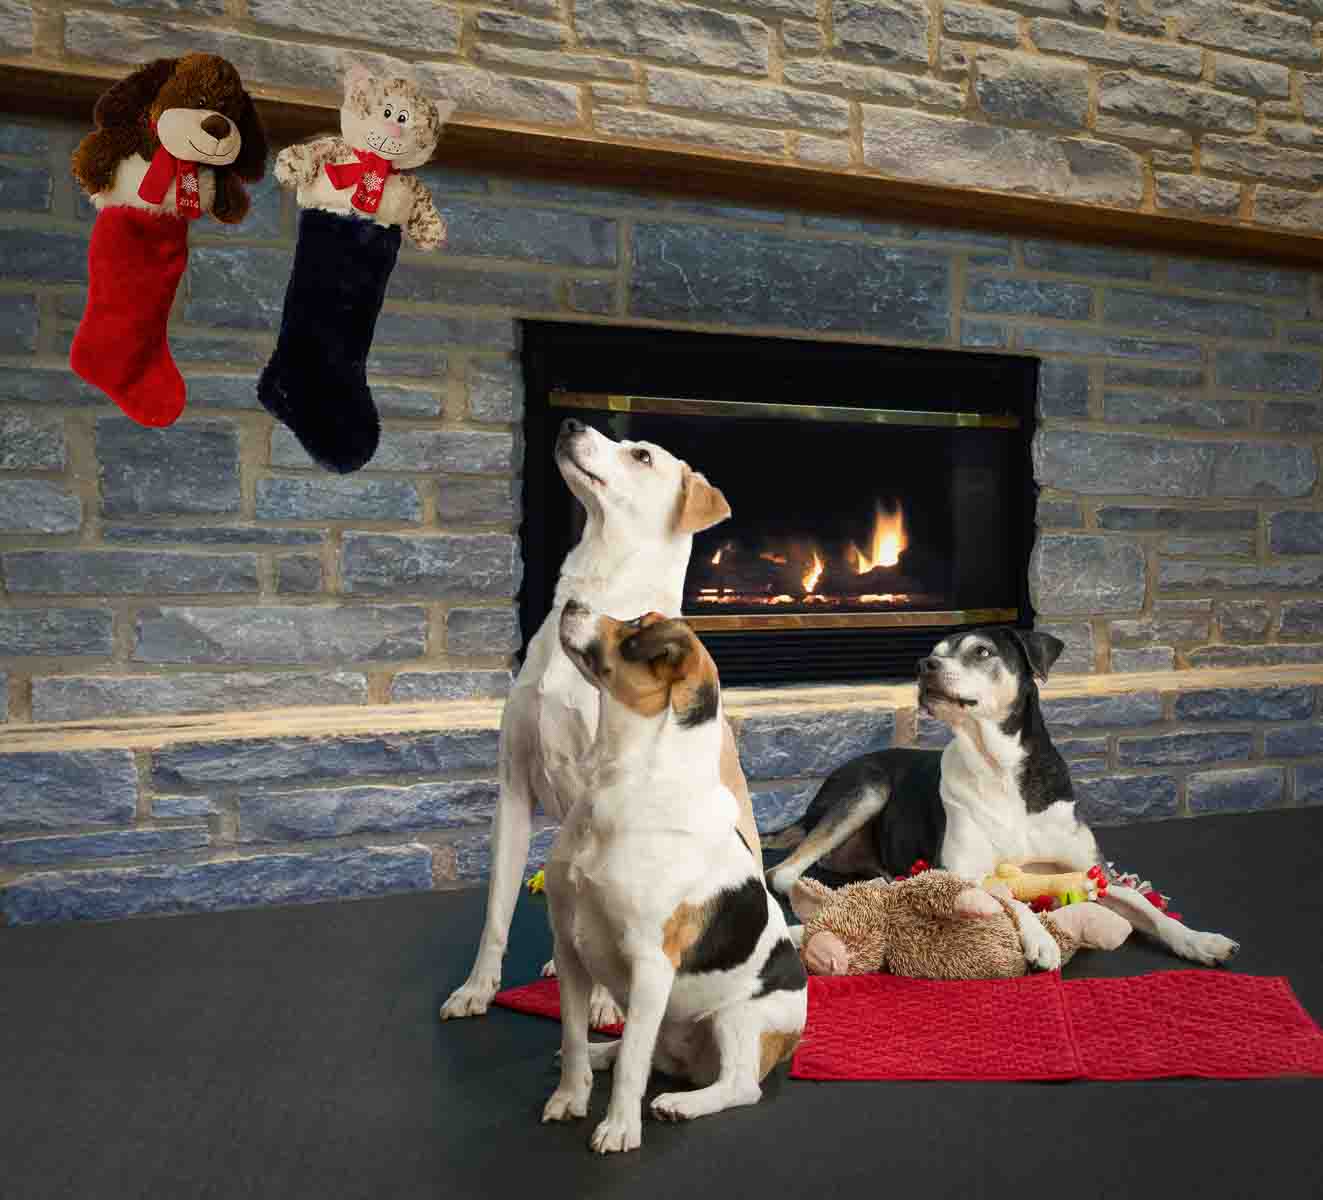 Two dogs sitting in front of a fireplace.